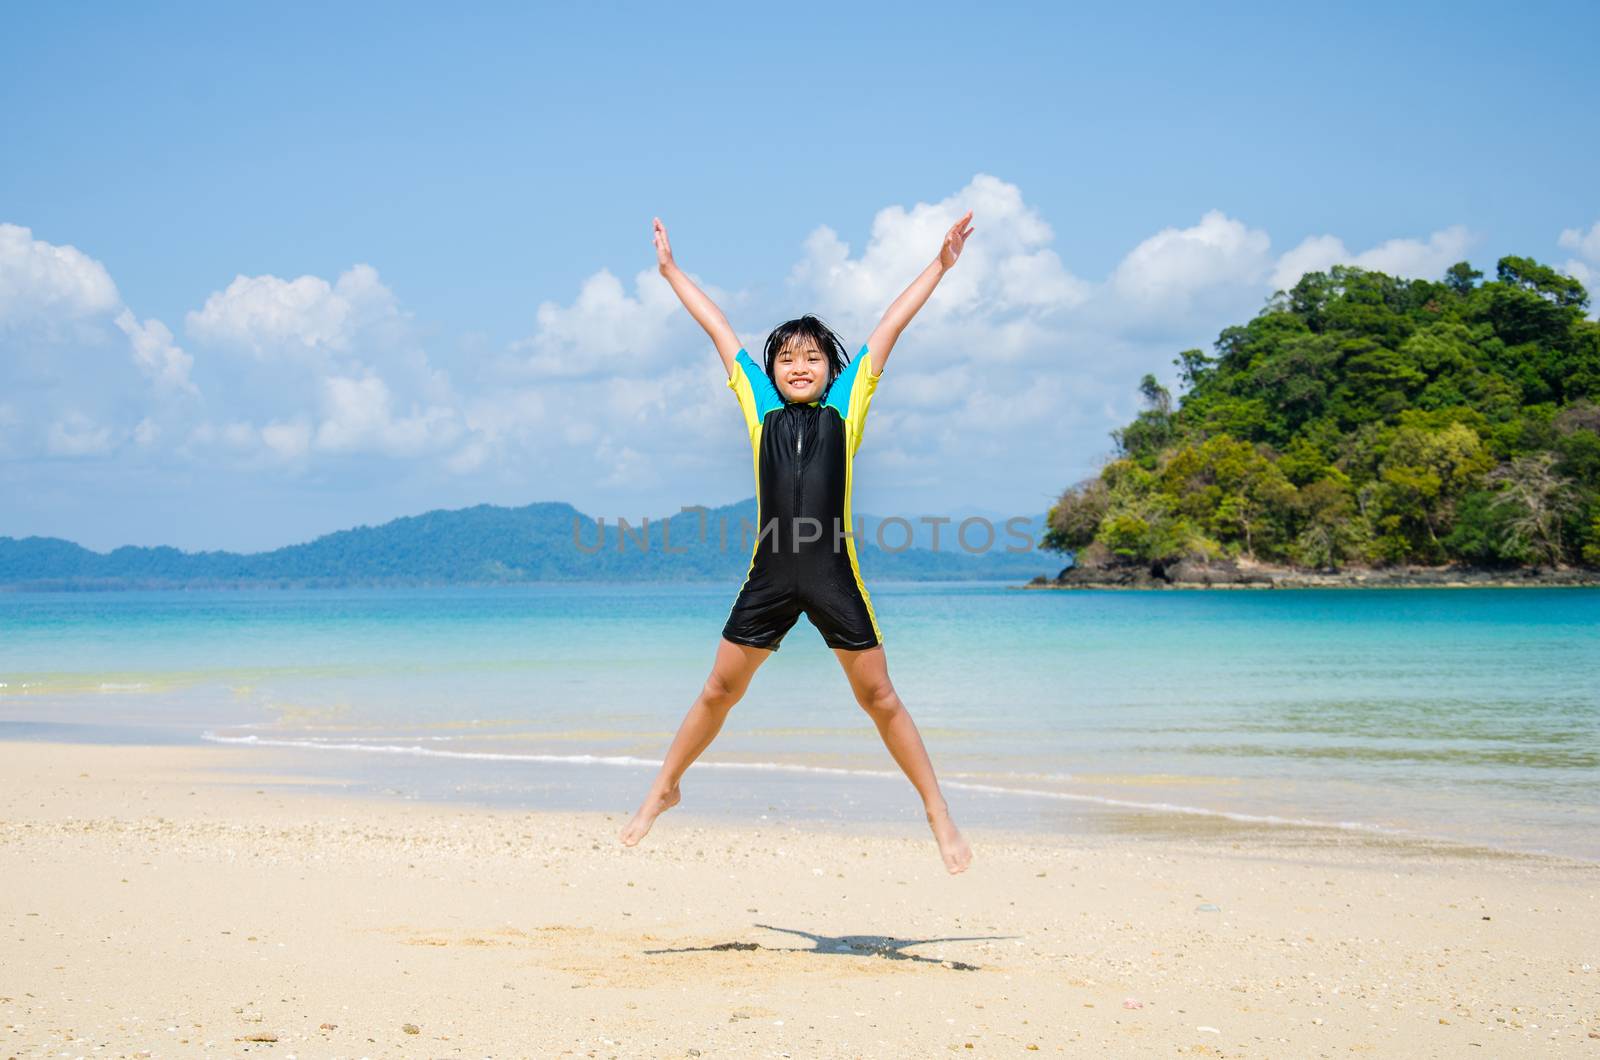 Girl jumping on the beach.
 by chatchai